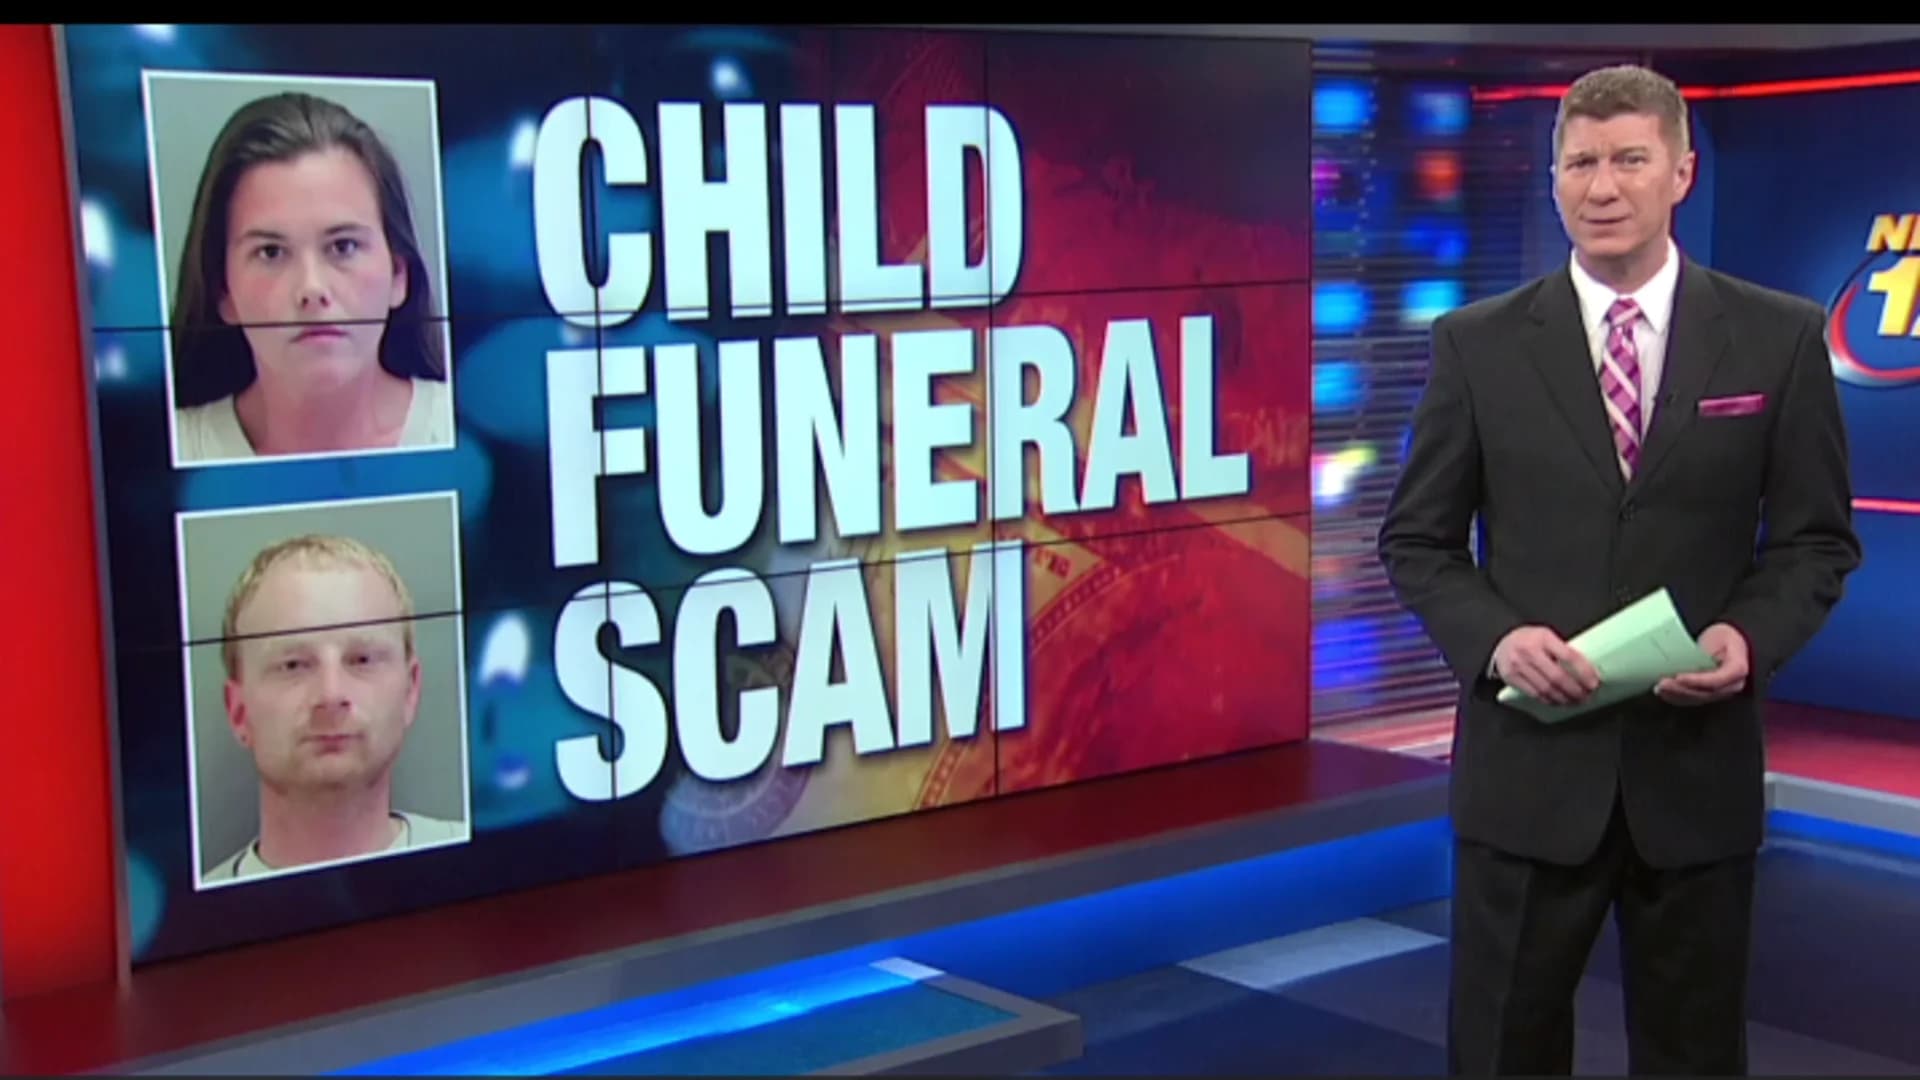 Prosecutors: Child funeral scammers may have more victims